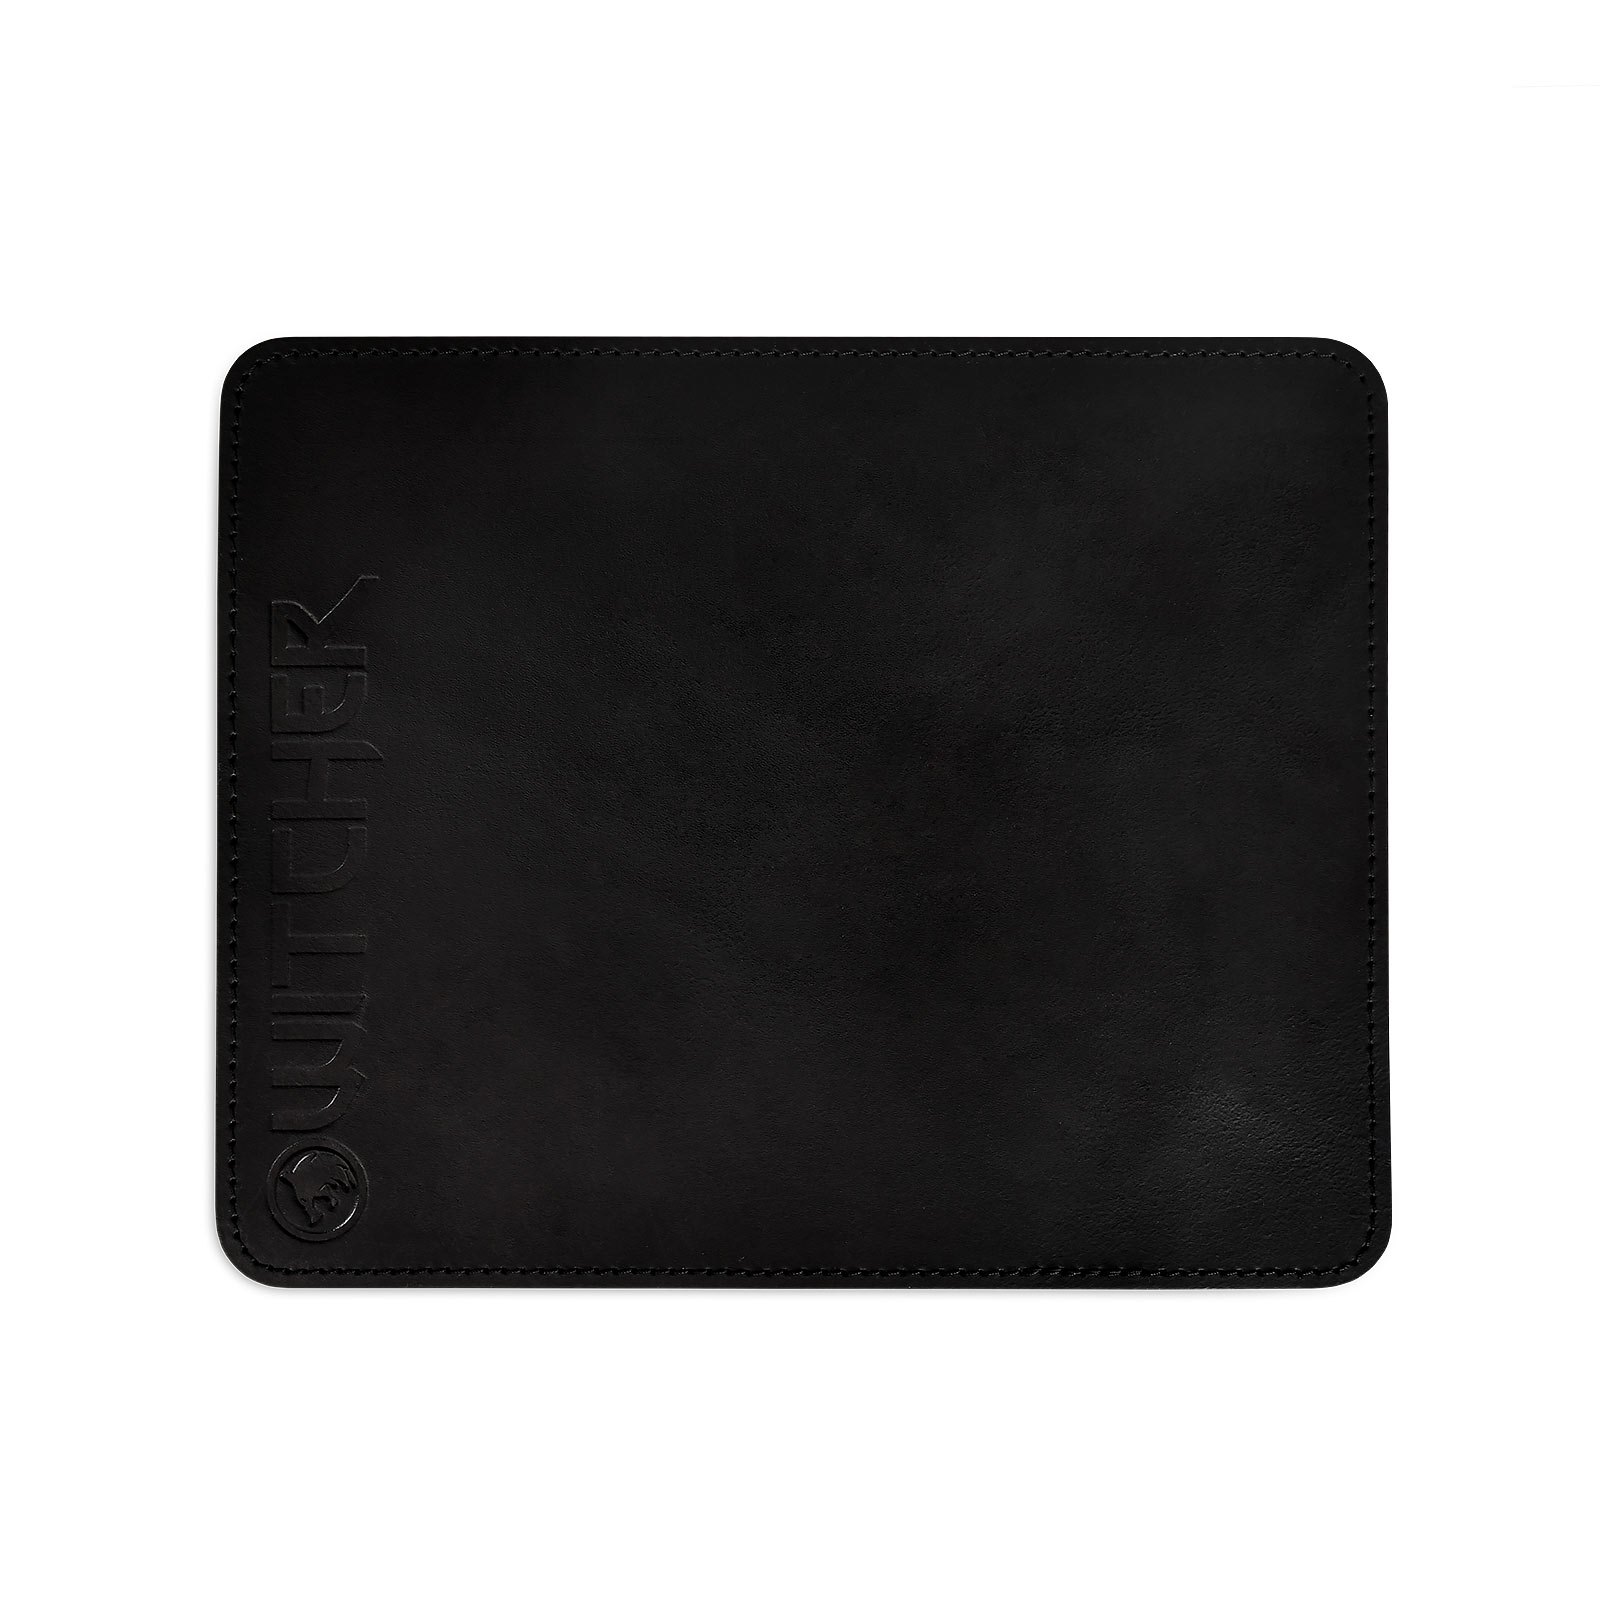 Black Mousepad for Witcher Fans